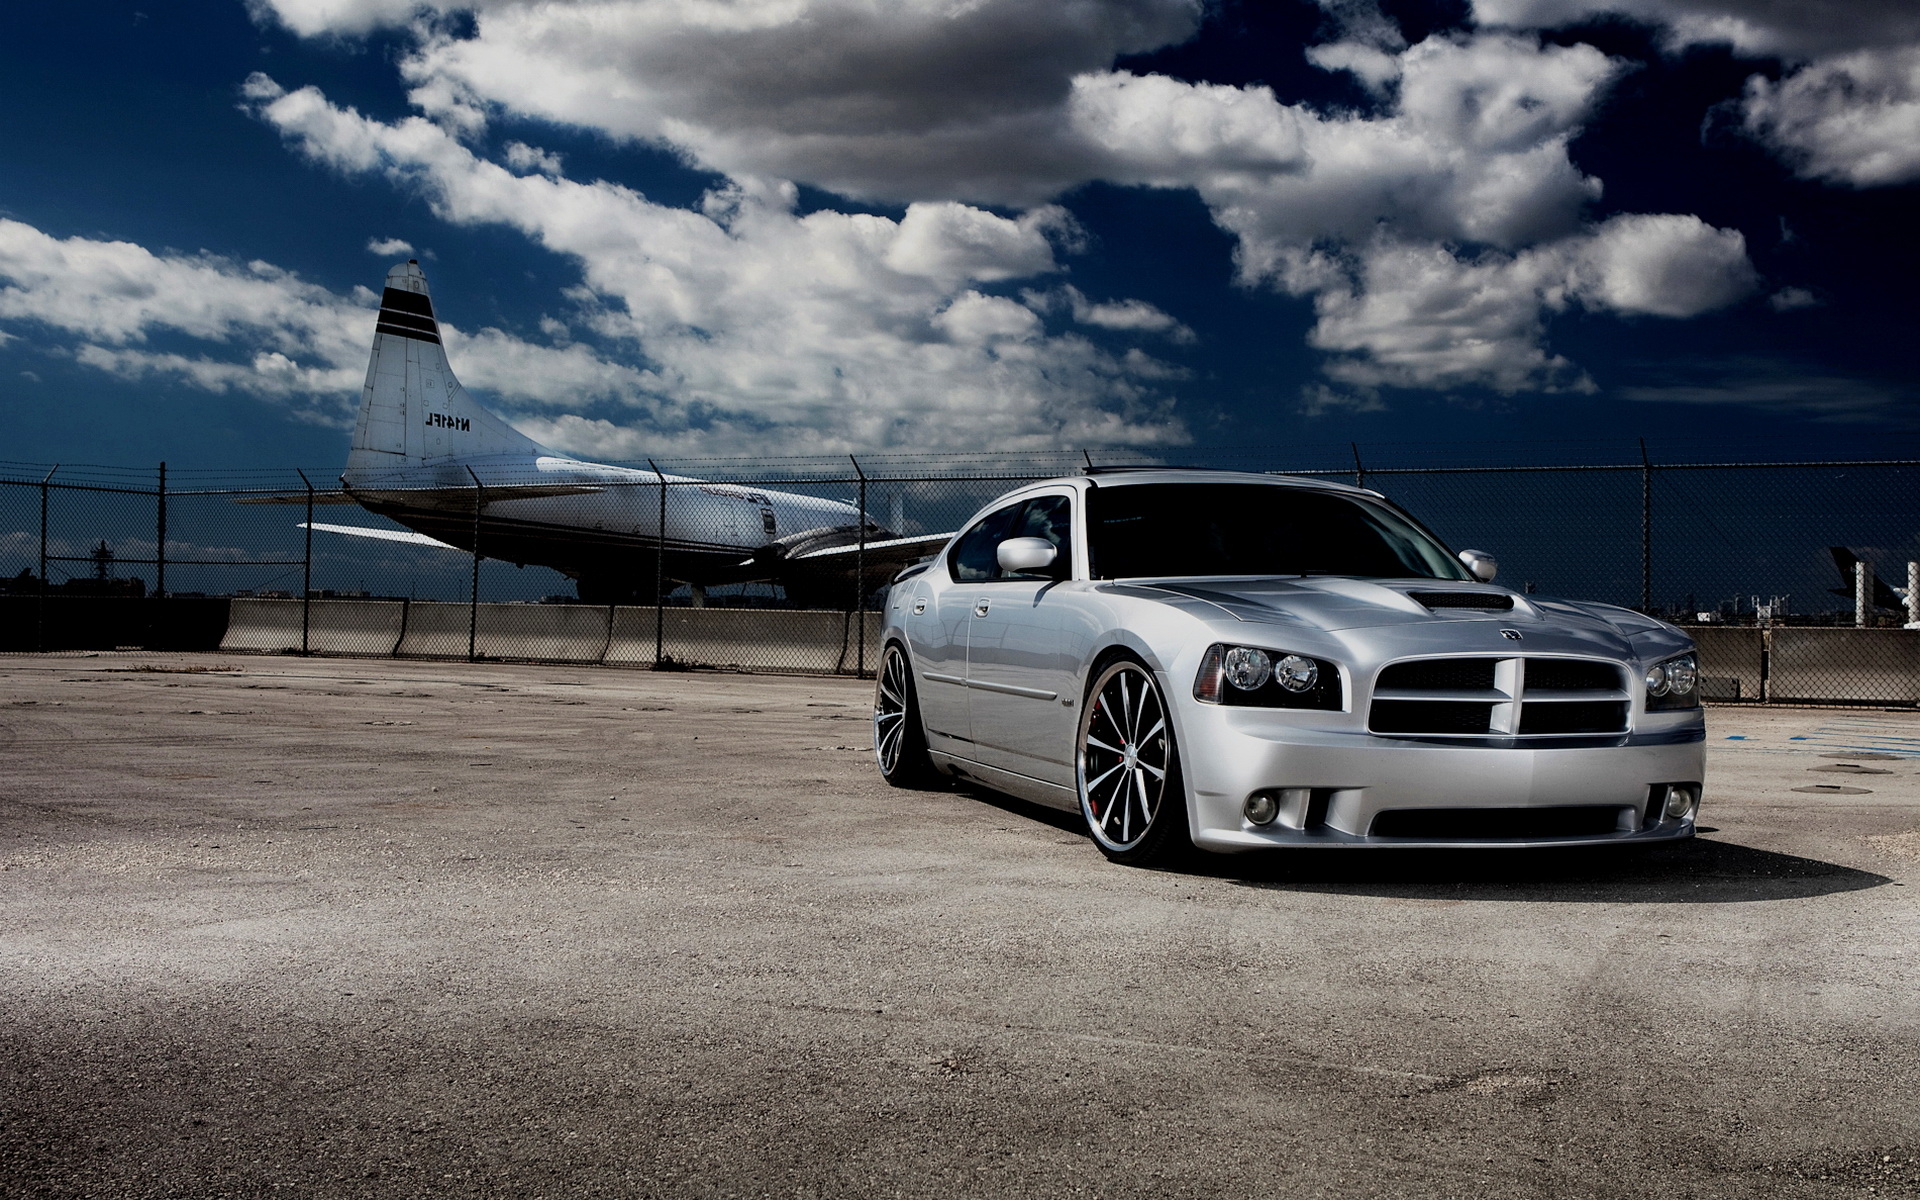 Auto_Dodge_Others_Dodge_Dodge-Charger_031180_.jpg